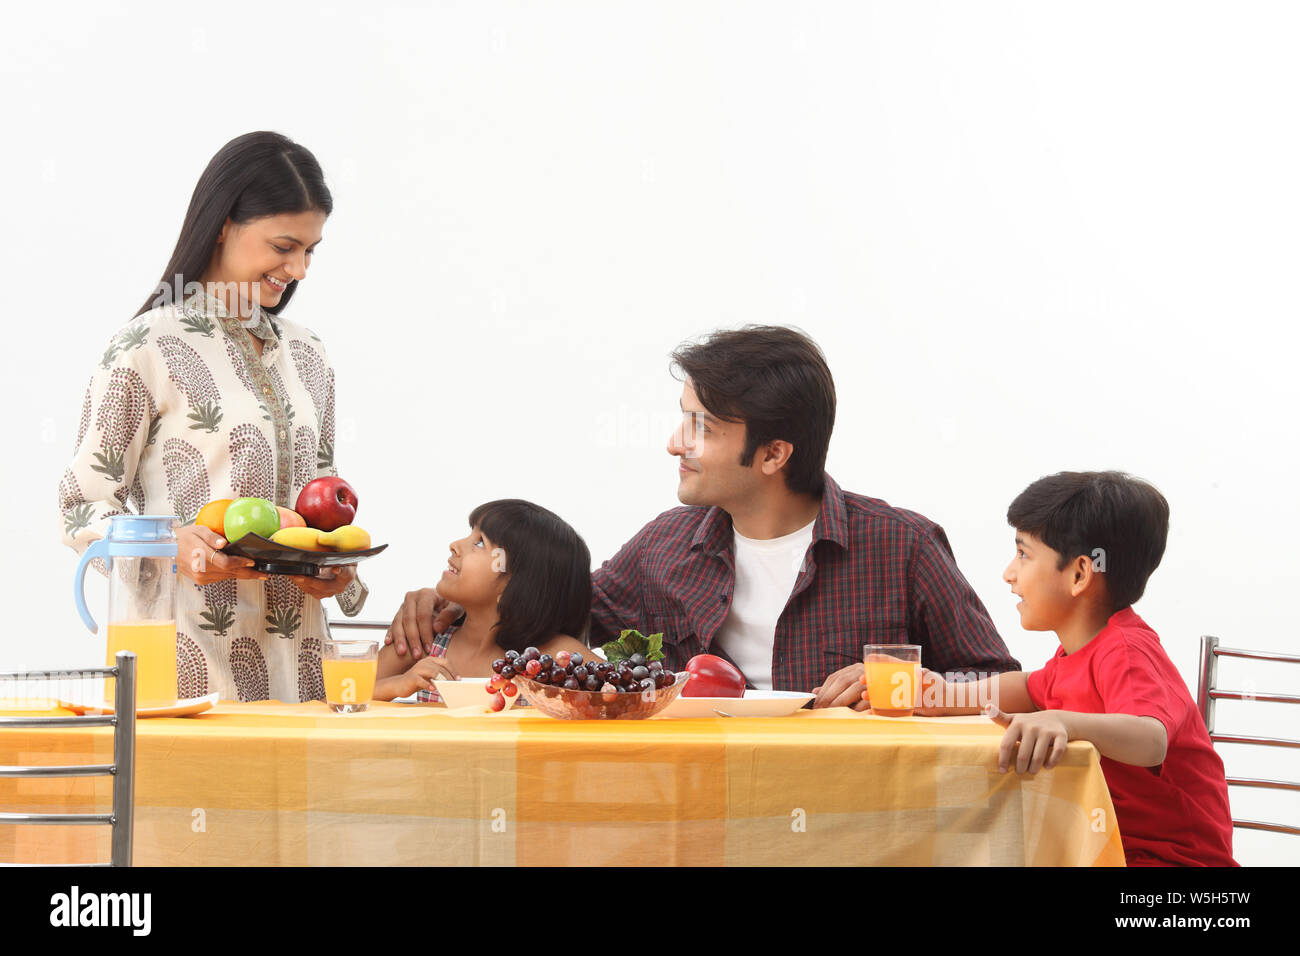 Woman serving fruits in breakfast to her family Stock Photo